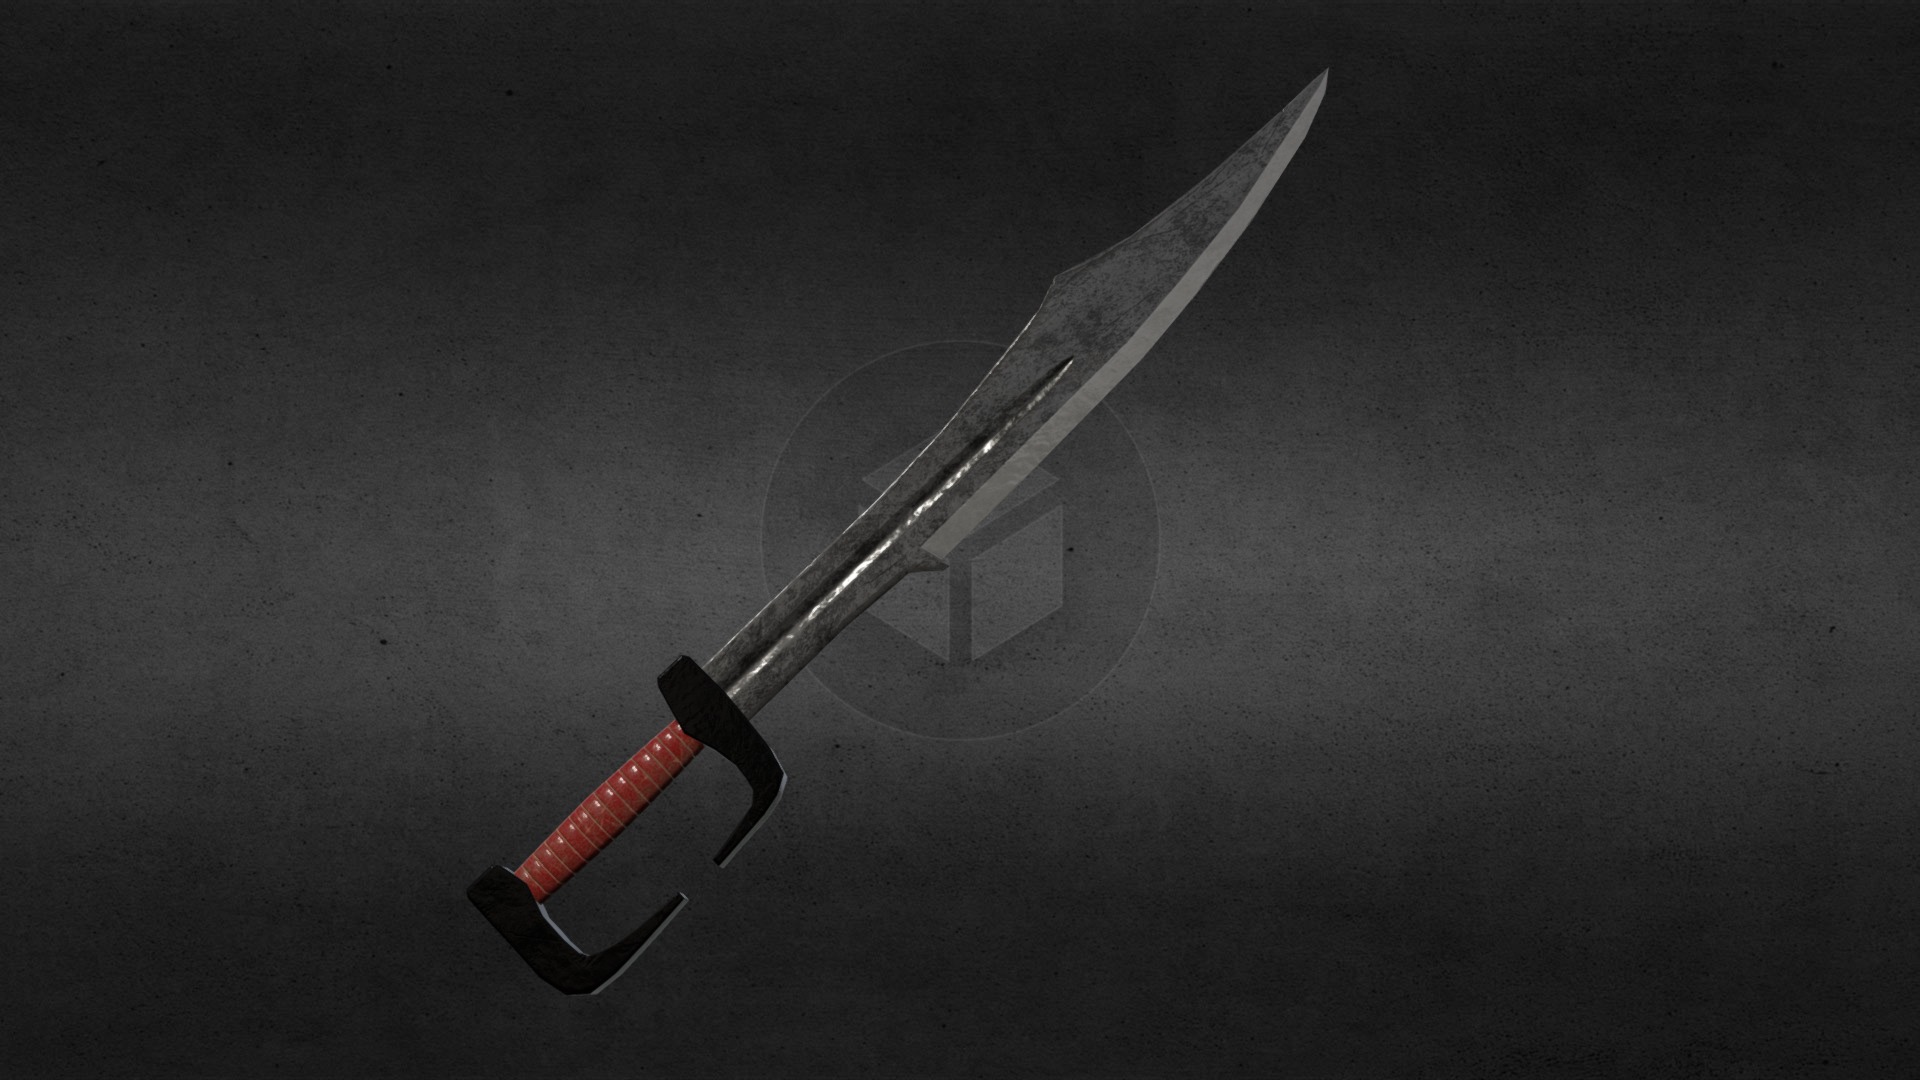 3D model Spartan Sword – Low Poly. - This is a 3D model of the Spartan Sword - Low Poly.. The 3D model is about a knife with a handle.